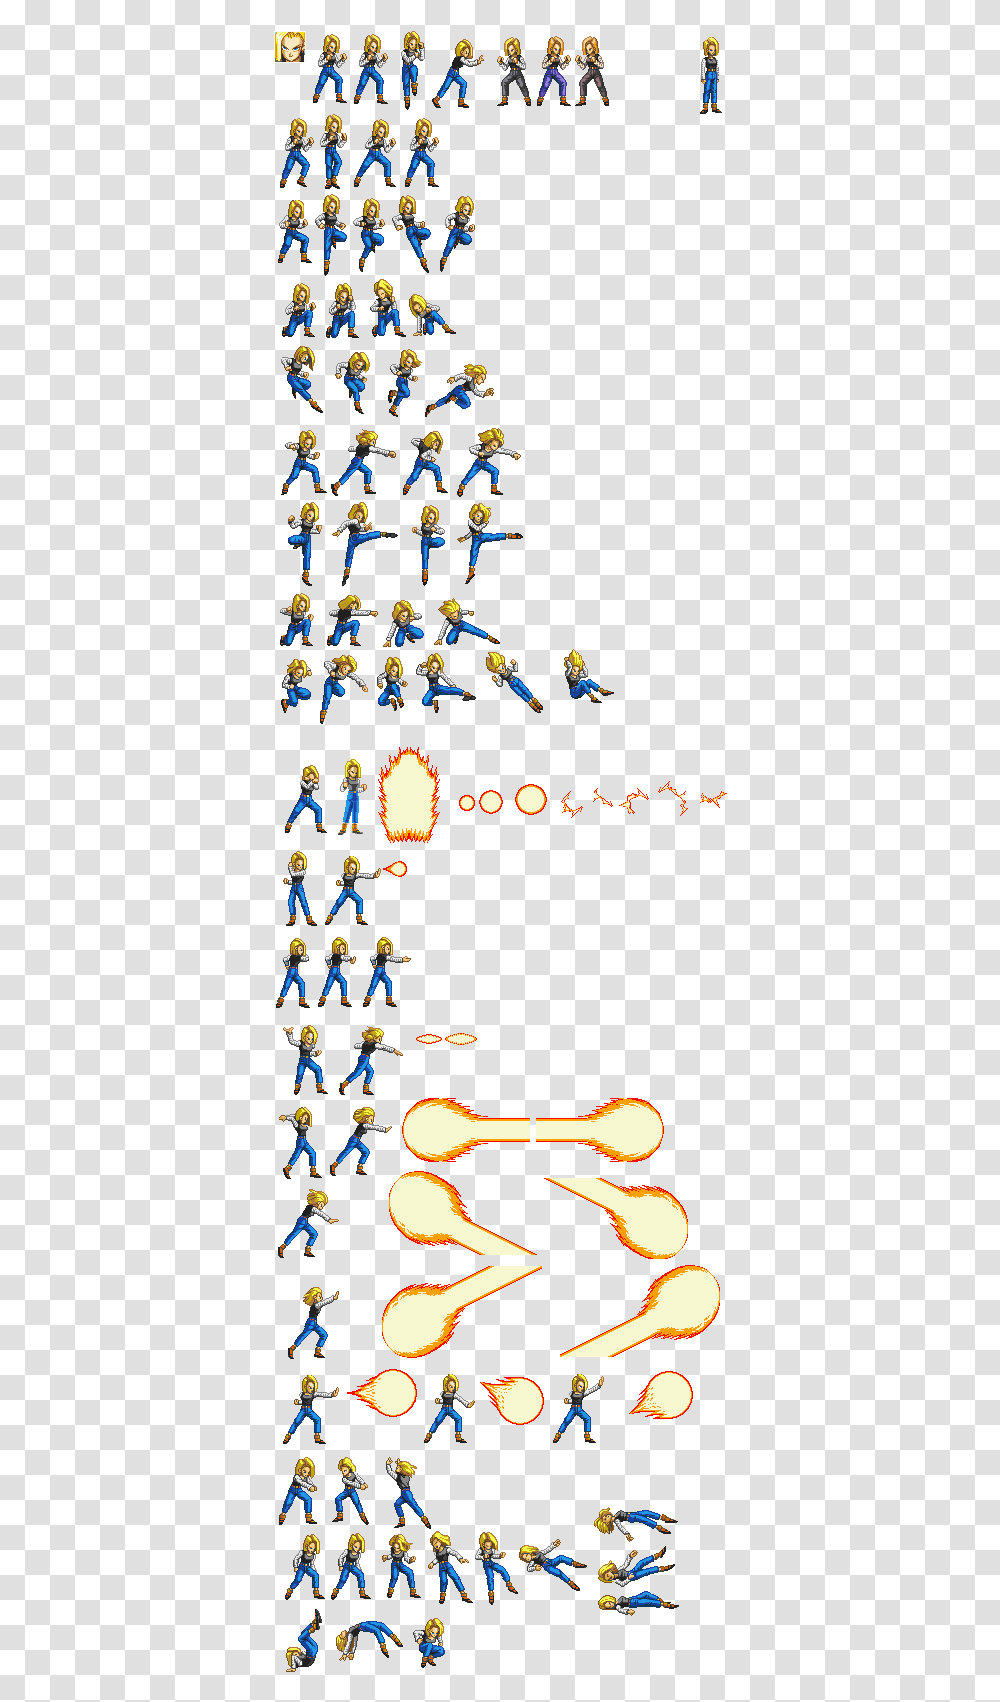 Android 18 By Belial Dragon Ball Sprites, Acrobatic, Leisure Activities, Circus, Christmas Tree Transparent Png